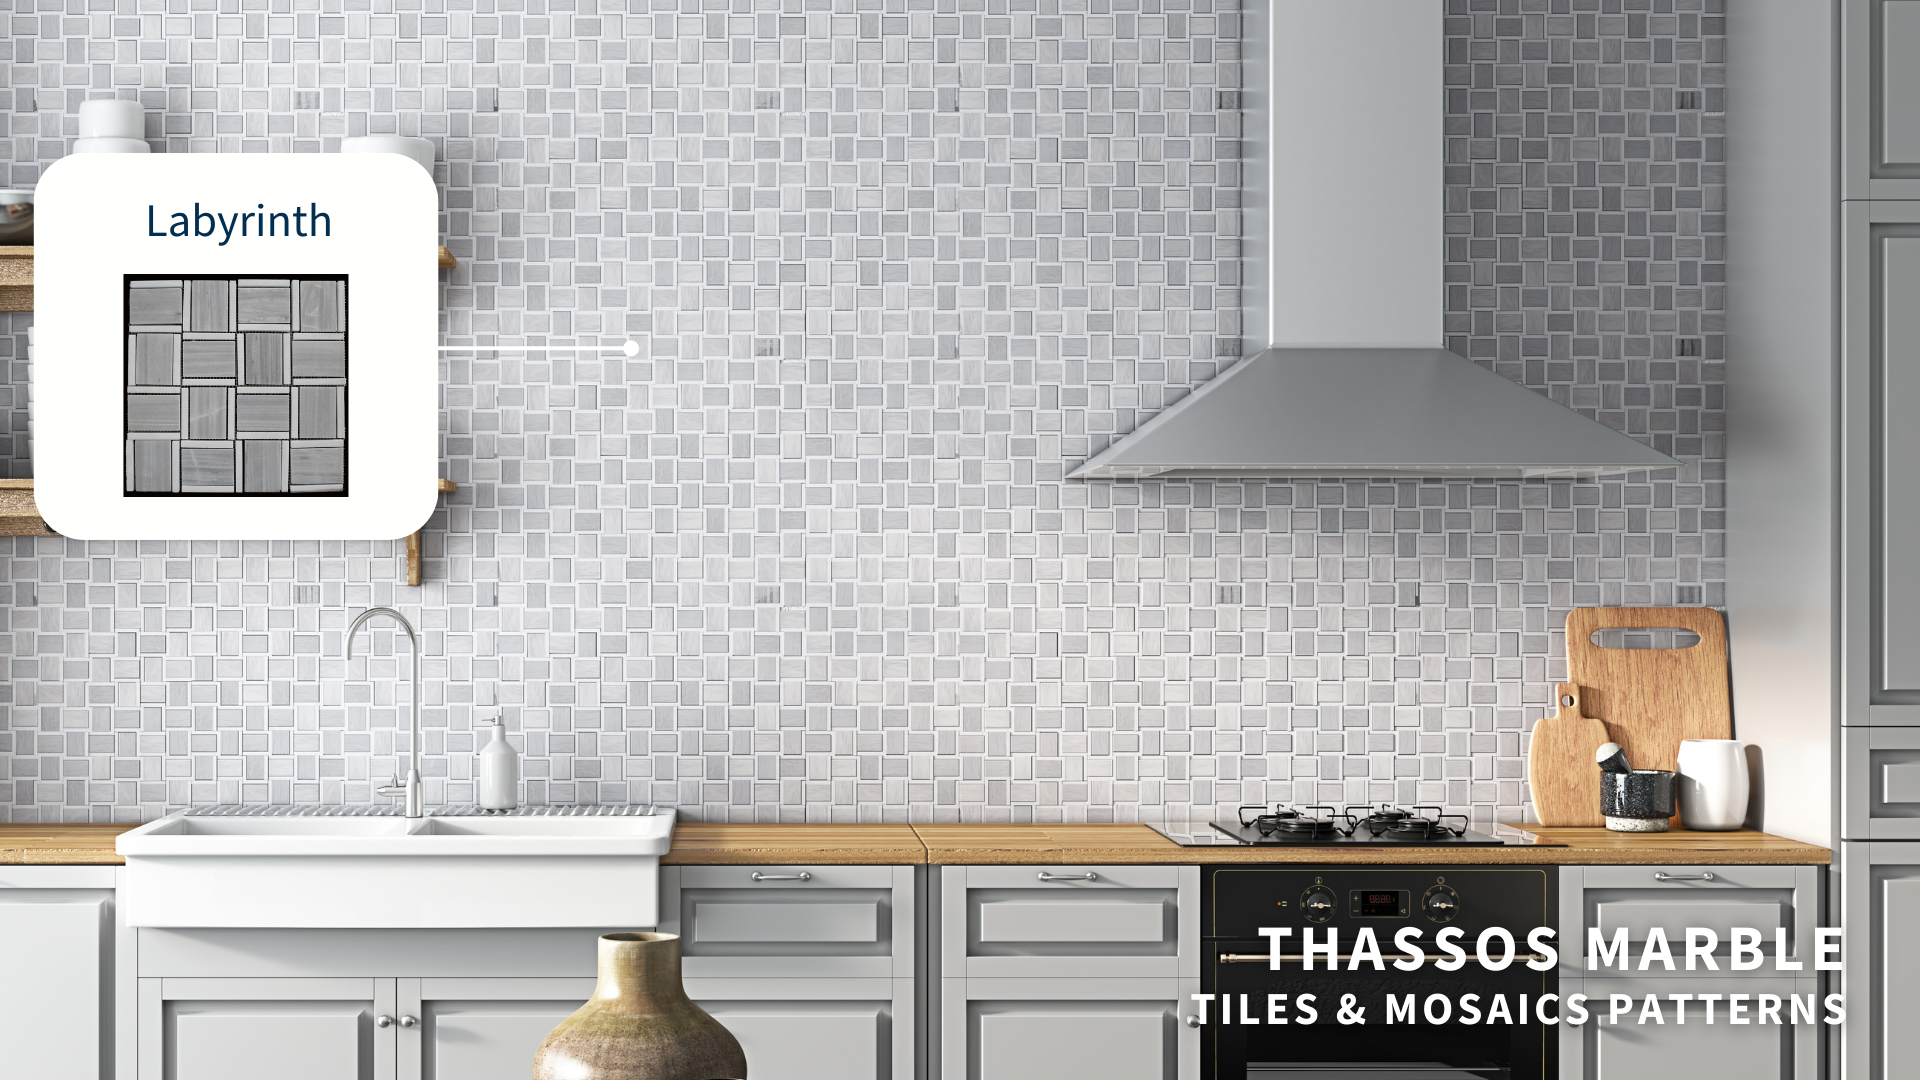 Backsplash in modern kitchen, with complex labyrinth mosaic pattern of Thassos marble and wooden elements. Types & Dimensions Of Thassos White Marble Tiles.